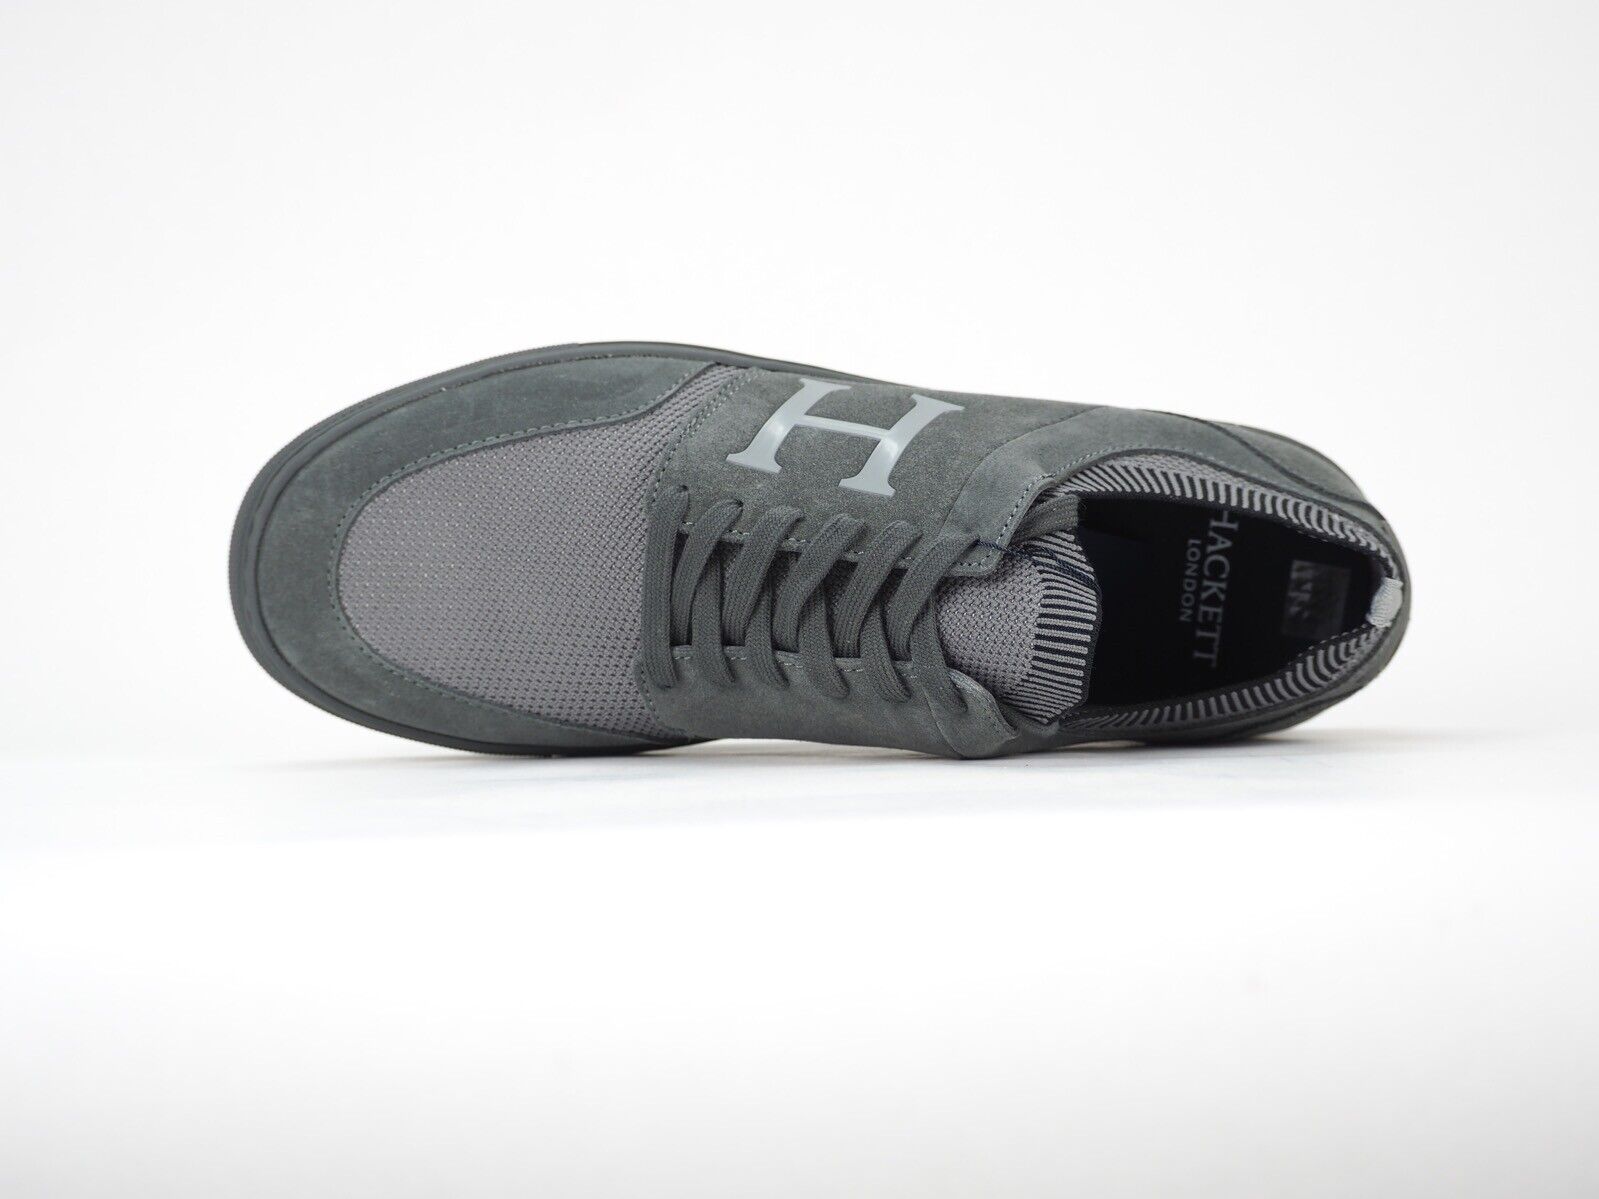 Hackett London Entry Knit HMS20855 Grey Leather Casual Shoes Trainers UK 5 - London Top Style